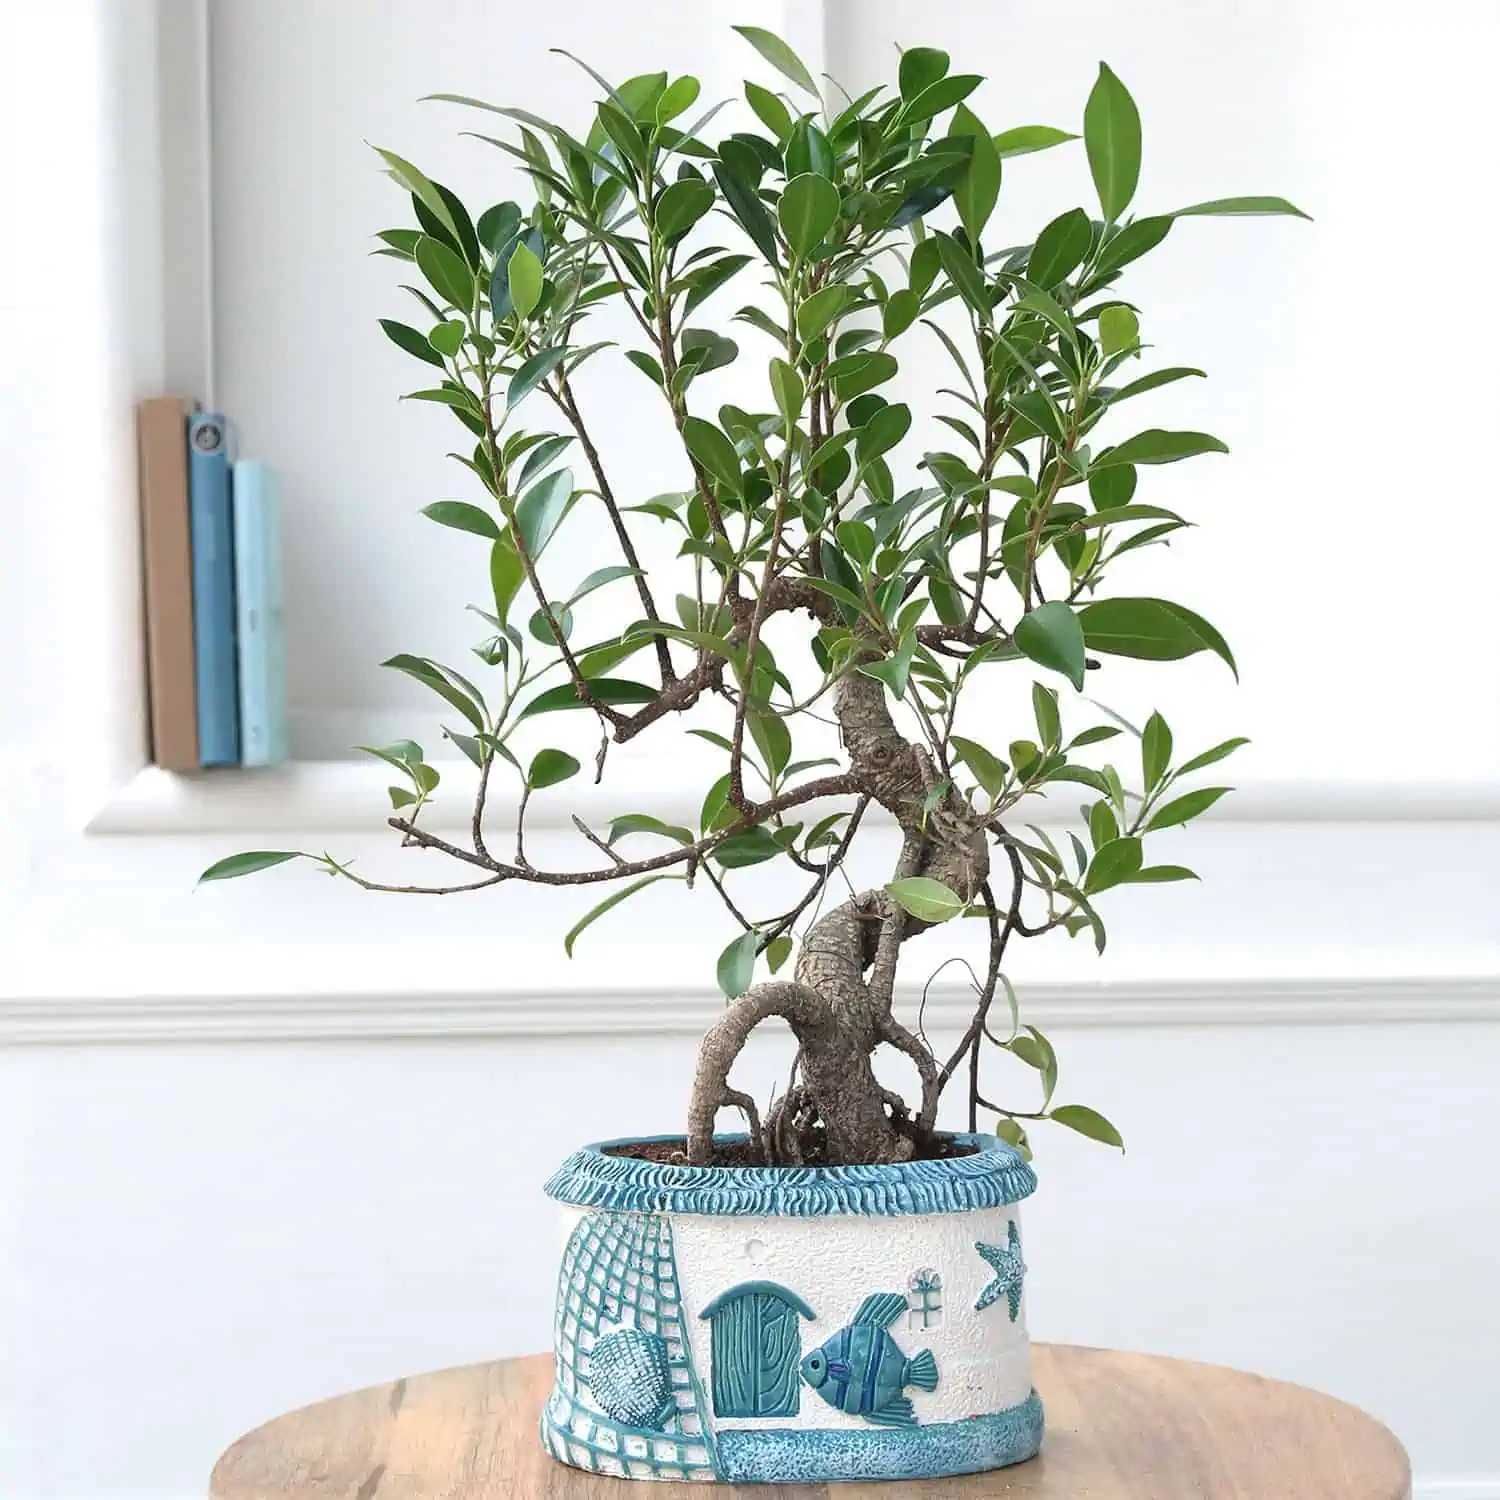 A beautiful indoor ficus bonsai tree at a reasonable price.